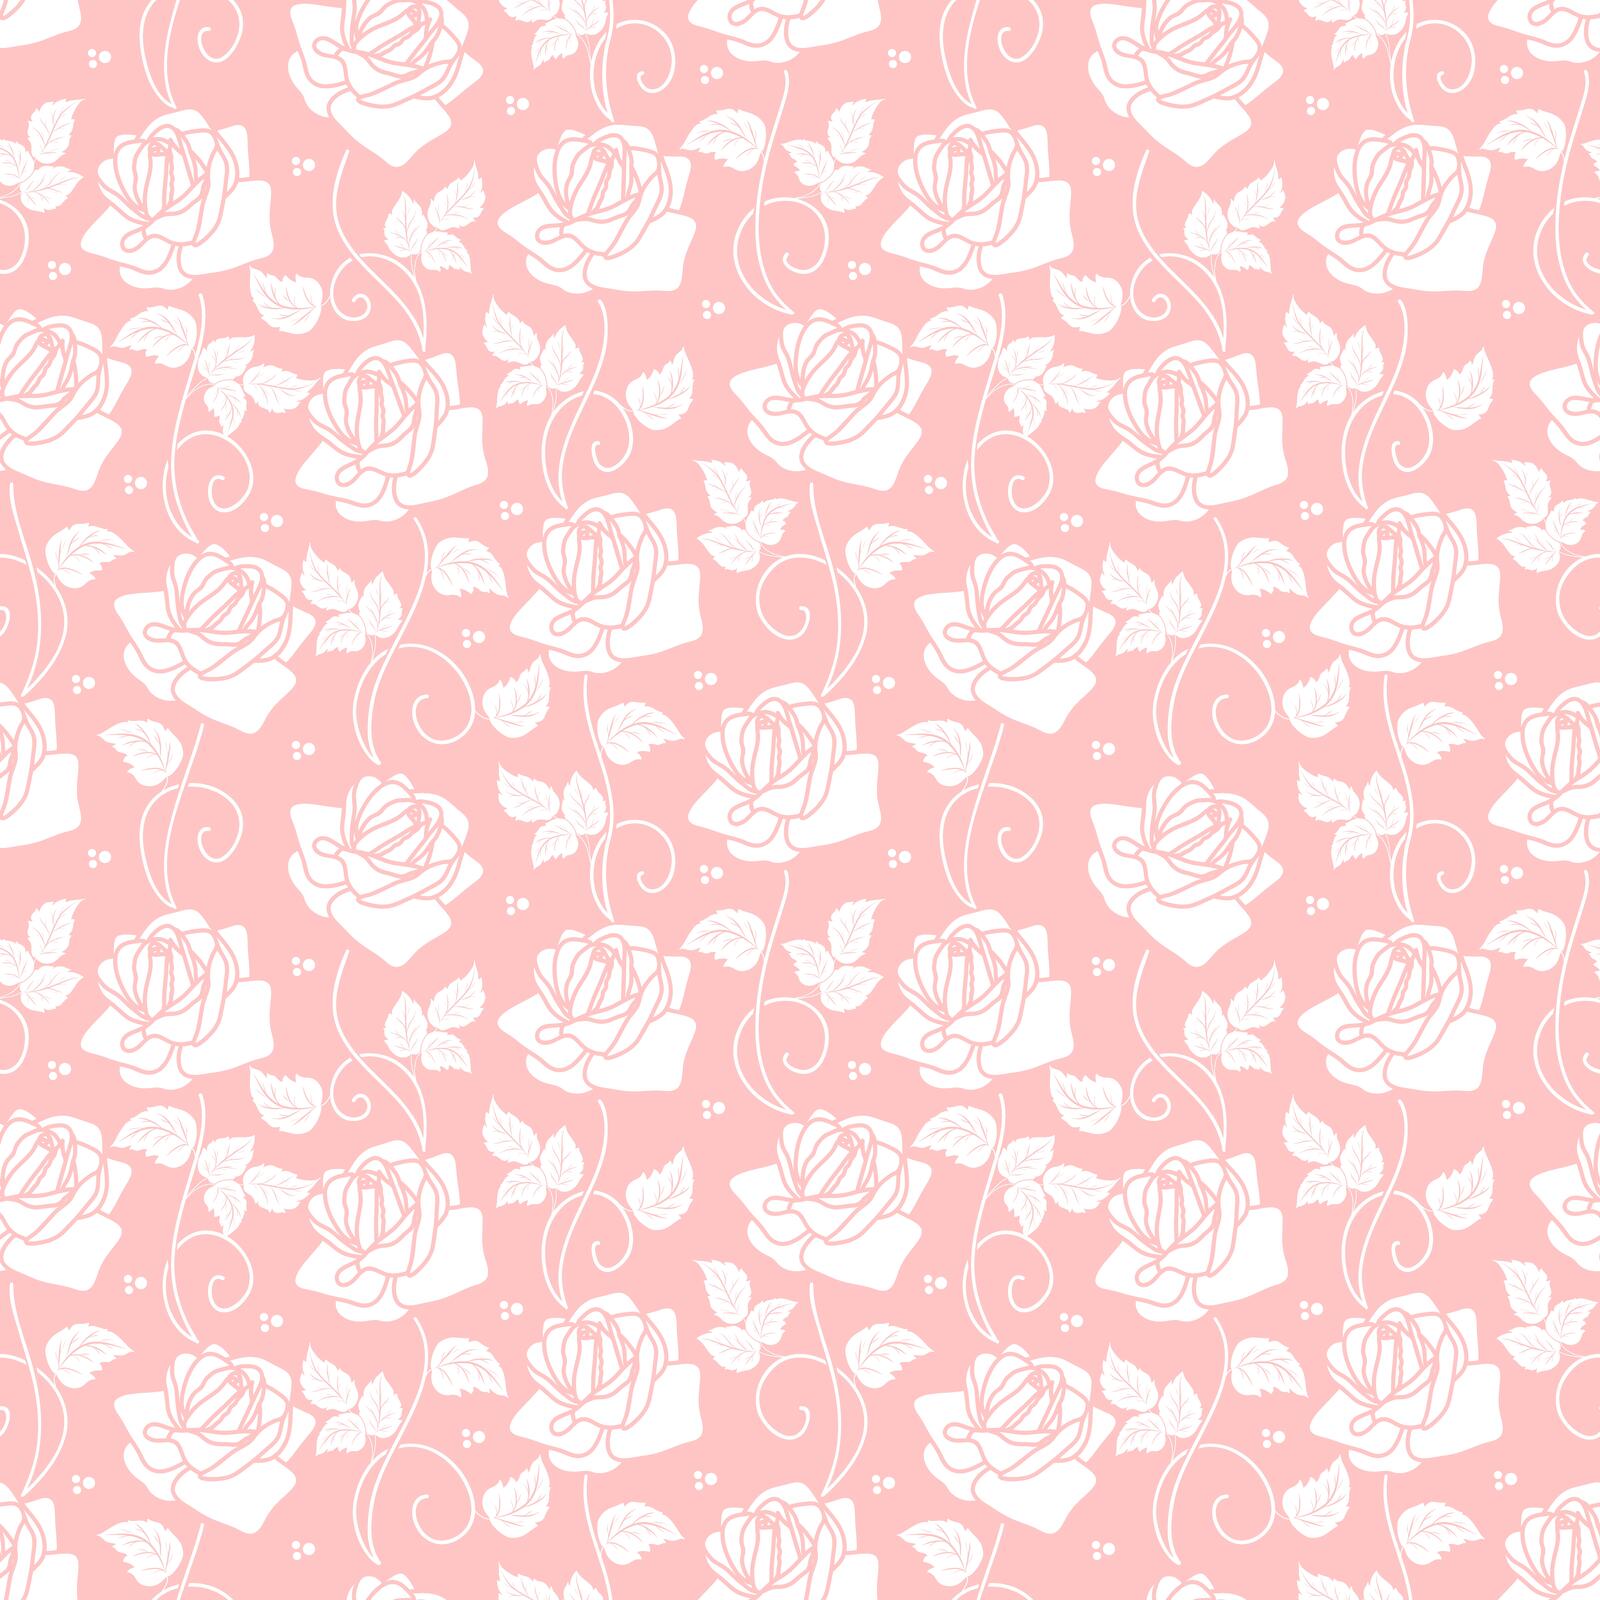 Wallpapers texture roses background on the desktop